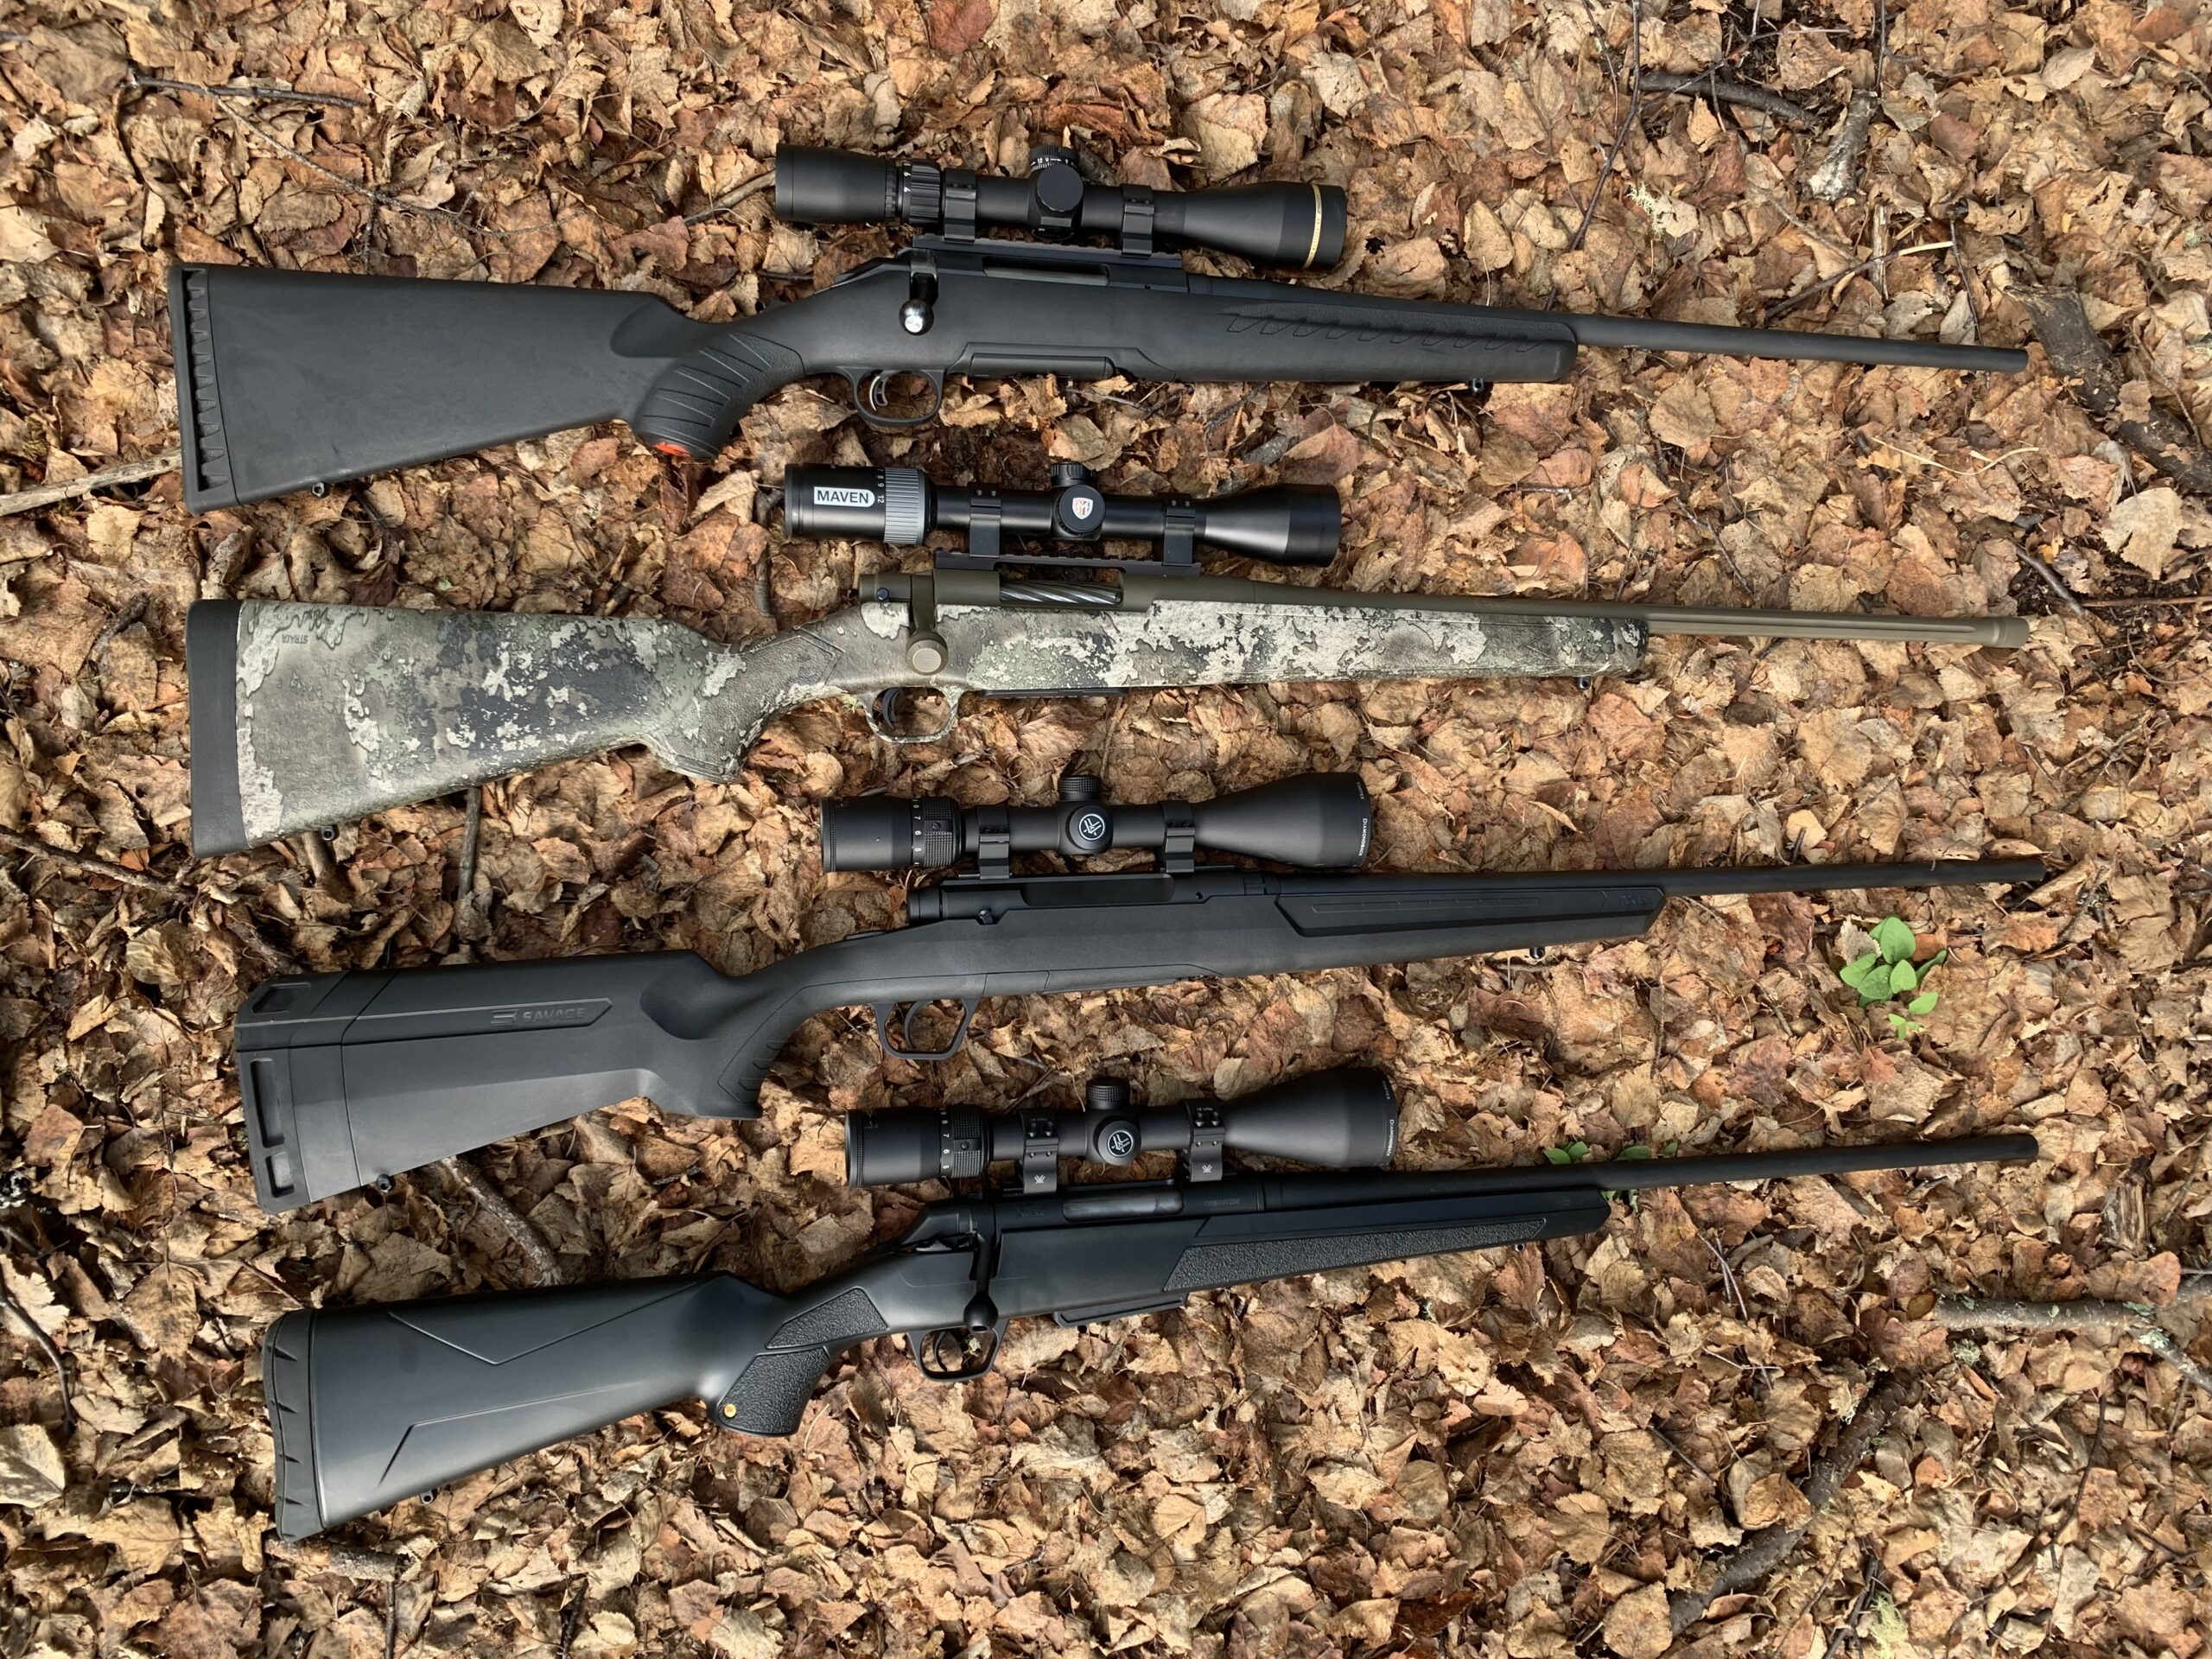 Budget hunting rifles tested